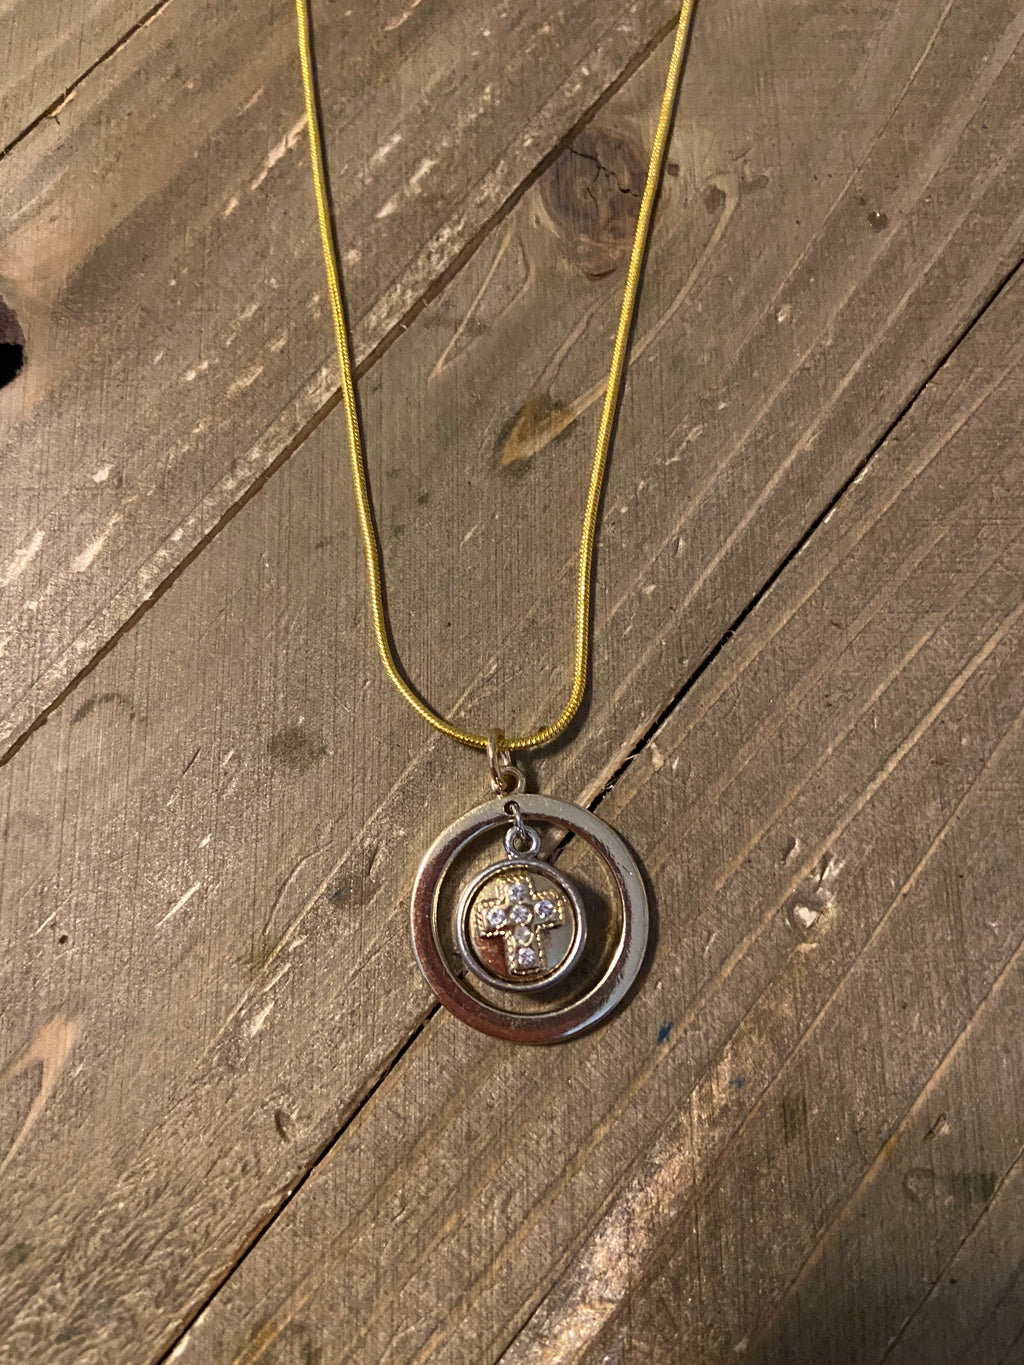 Silver and Gold Concentric Rings Pendant with a Cross Charm Necklace